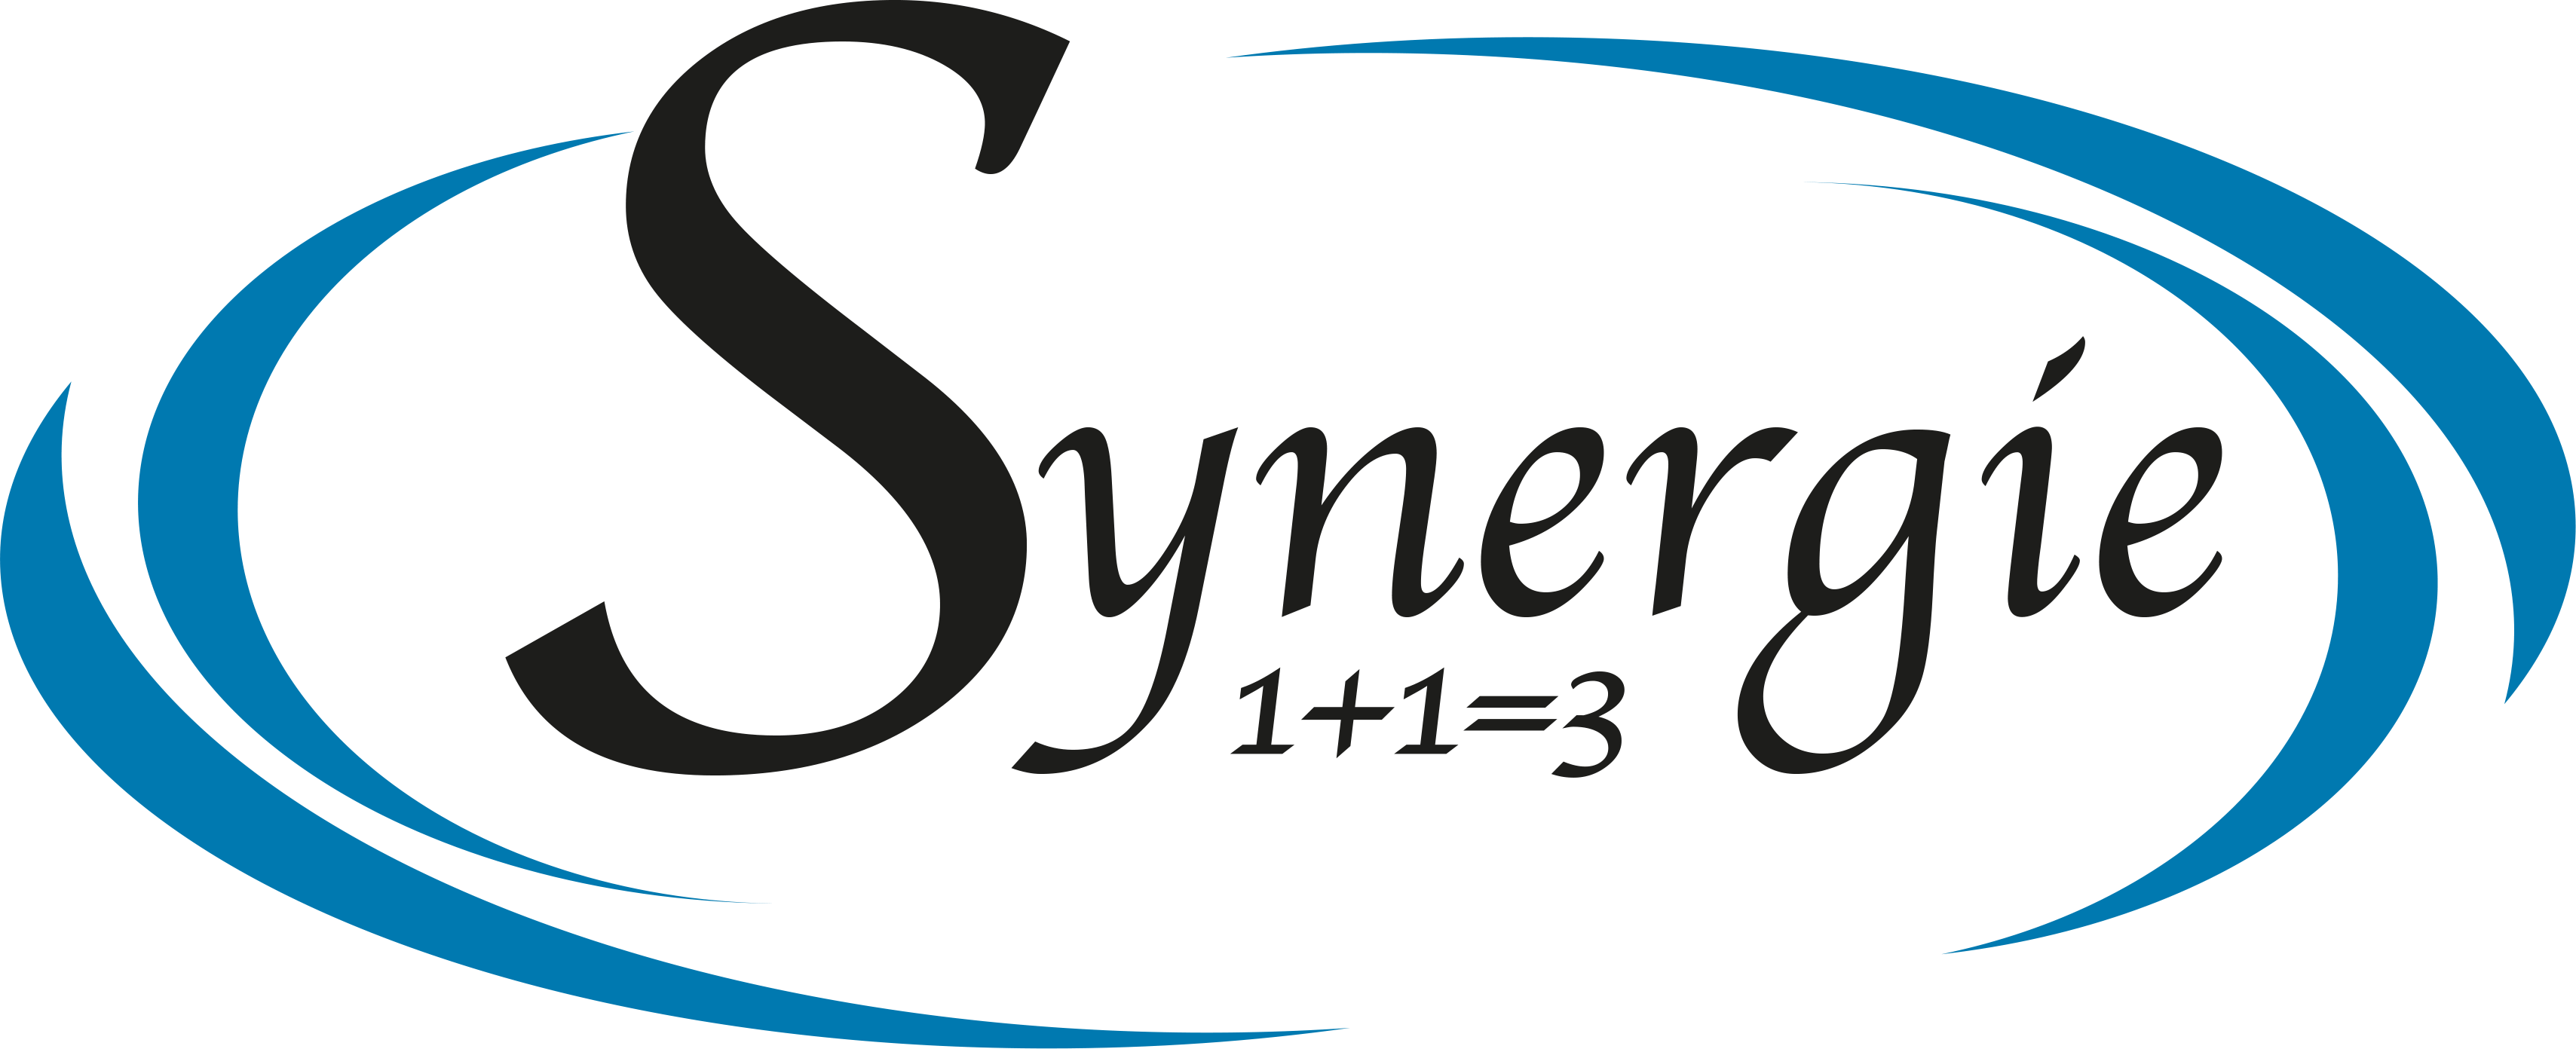 Synergie 1+1=3